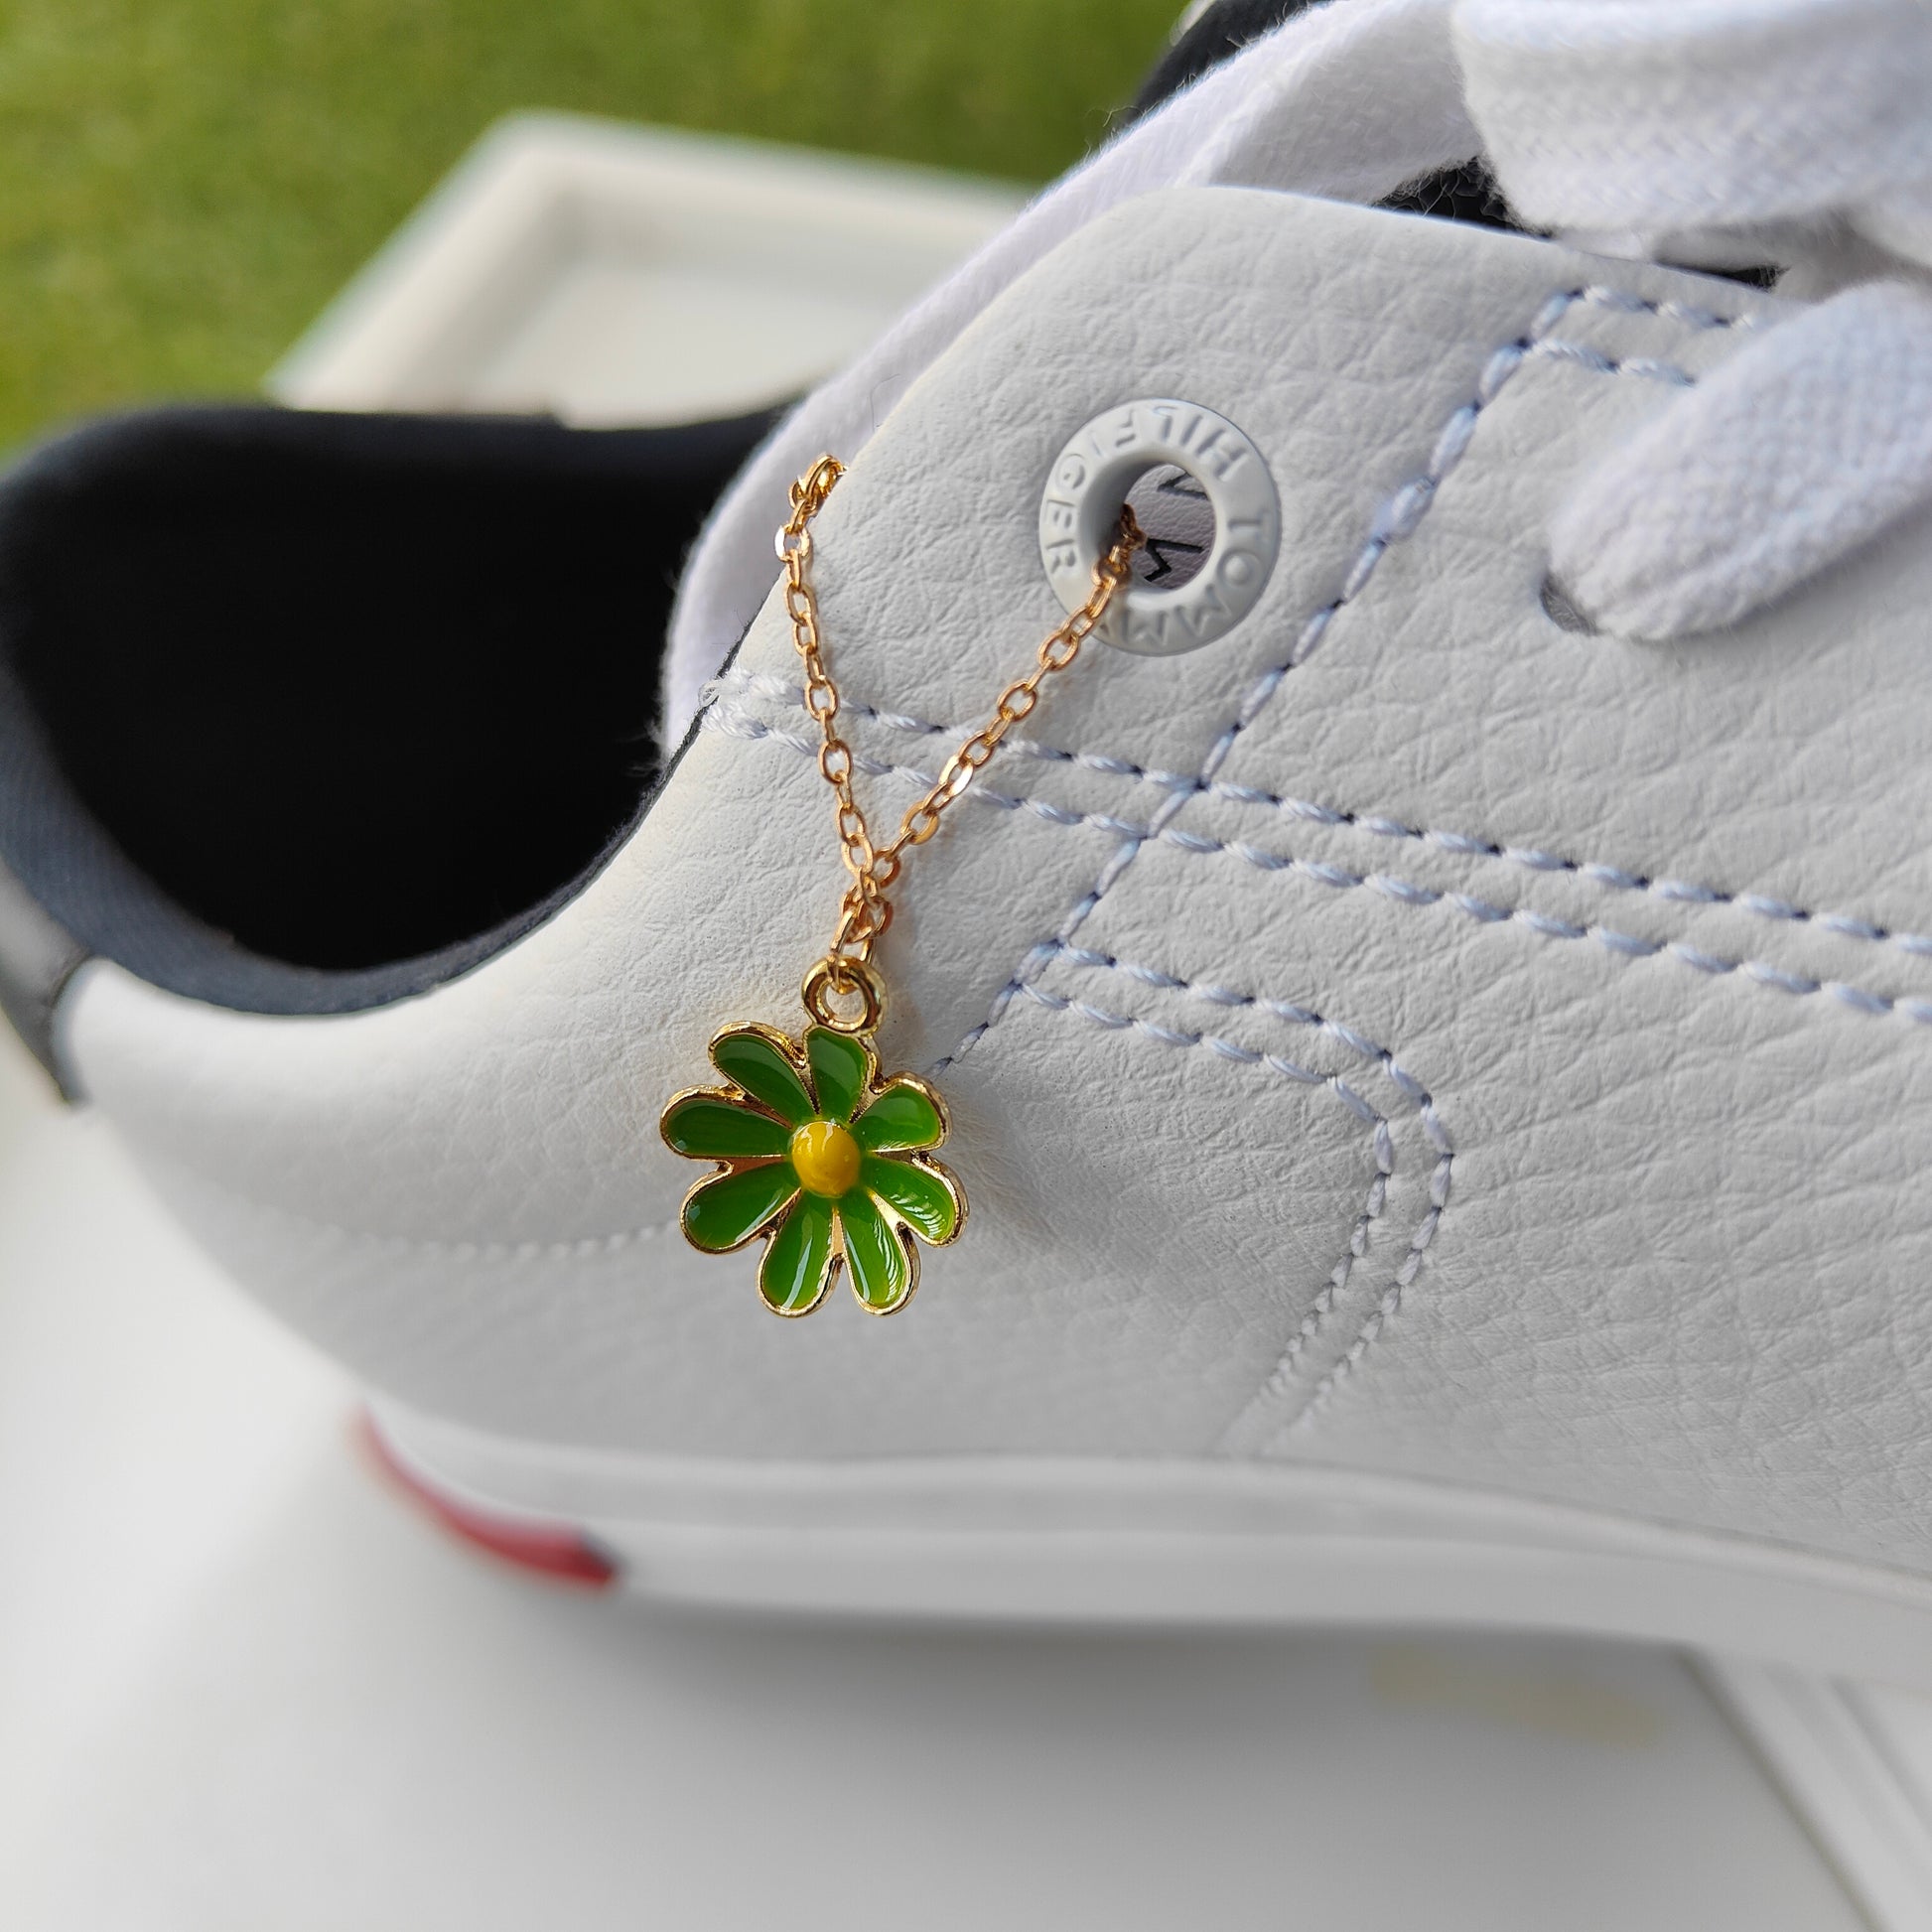 Daisy Sunflower Dangle Shoe Lace Sneaker Accessories Summer Floral Skate Charm